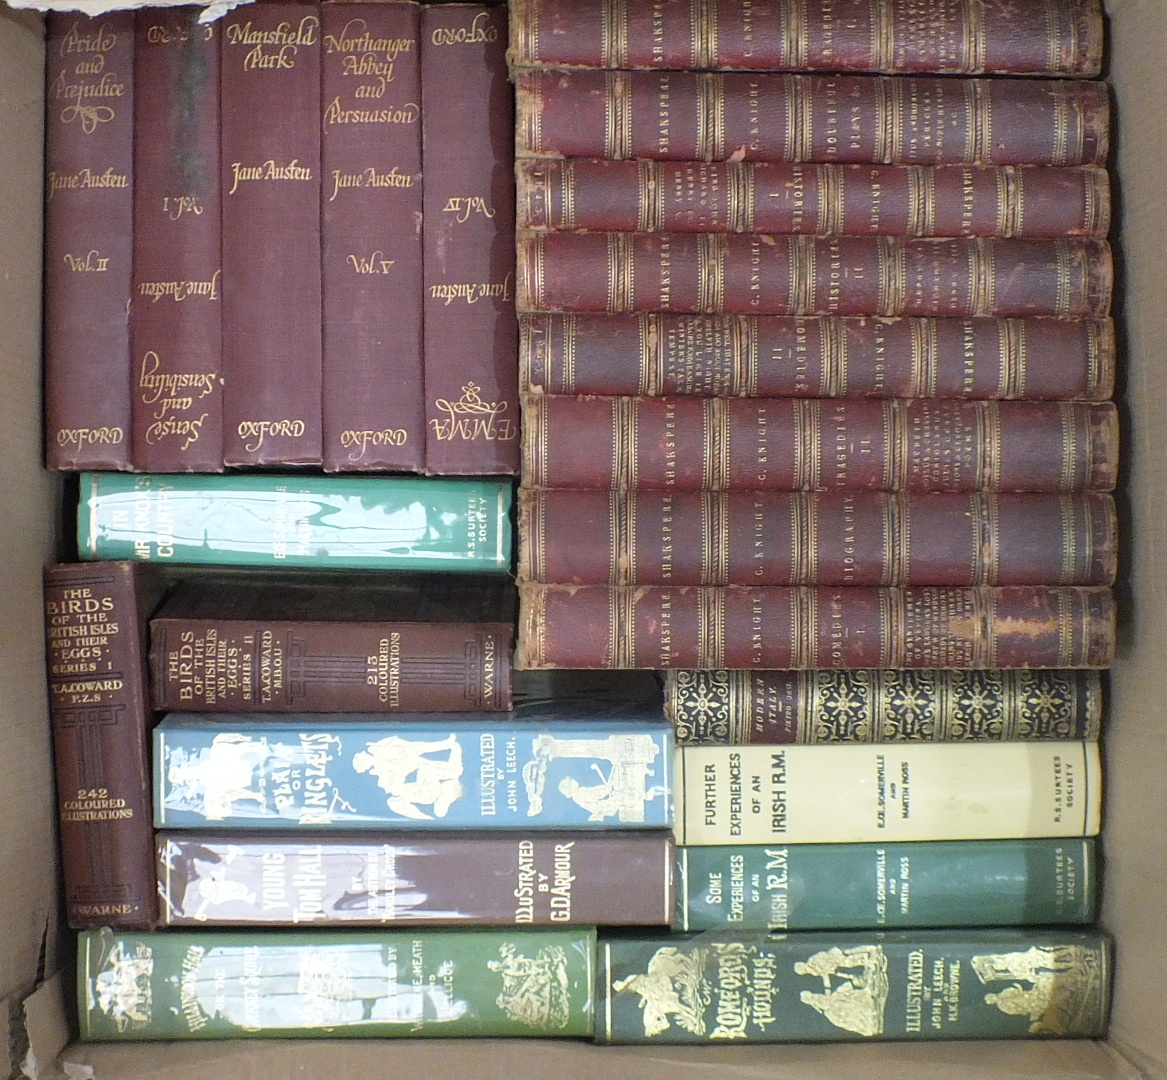 Shakespeare (William) Works, The Pictorial Edition ed by Charles Knight, 8 vols, illus, me, hf mor